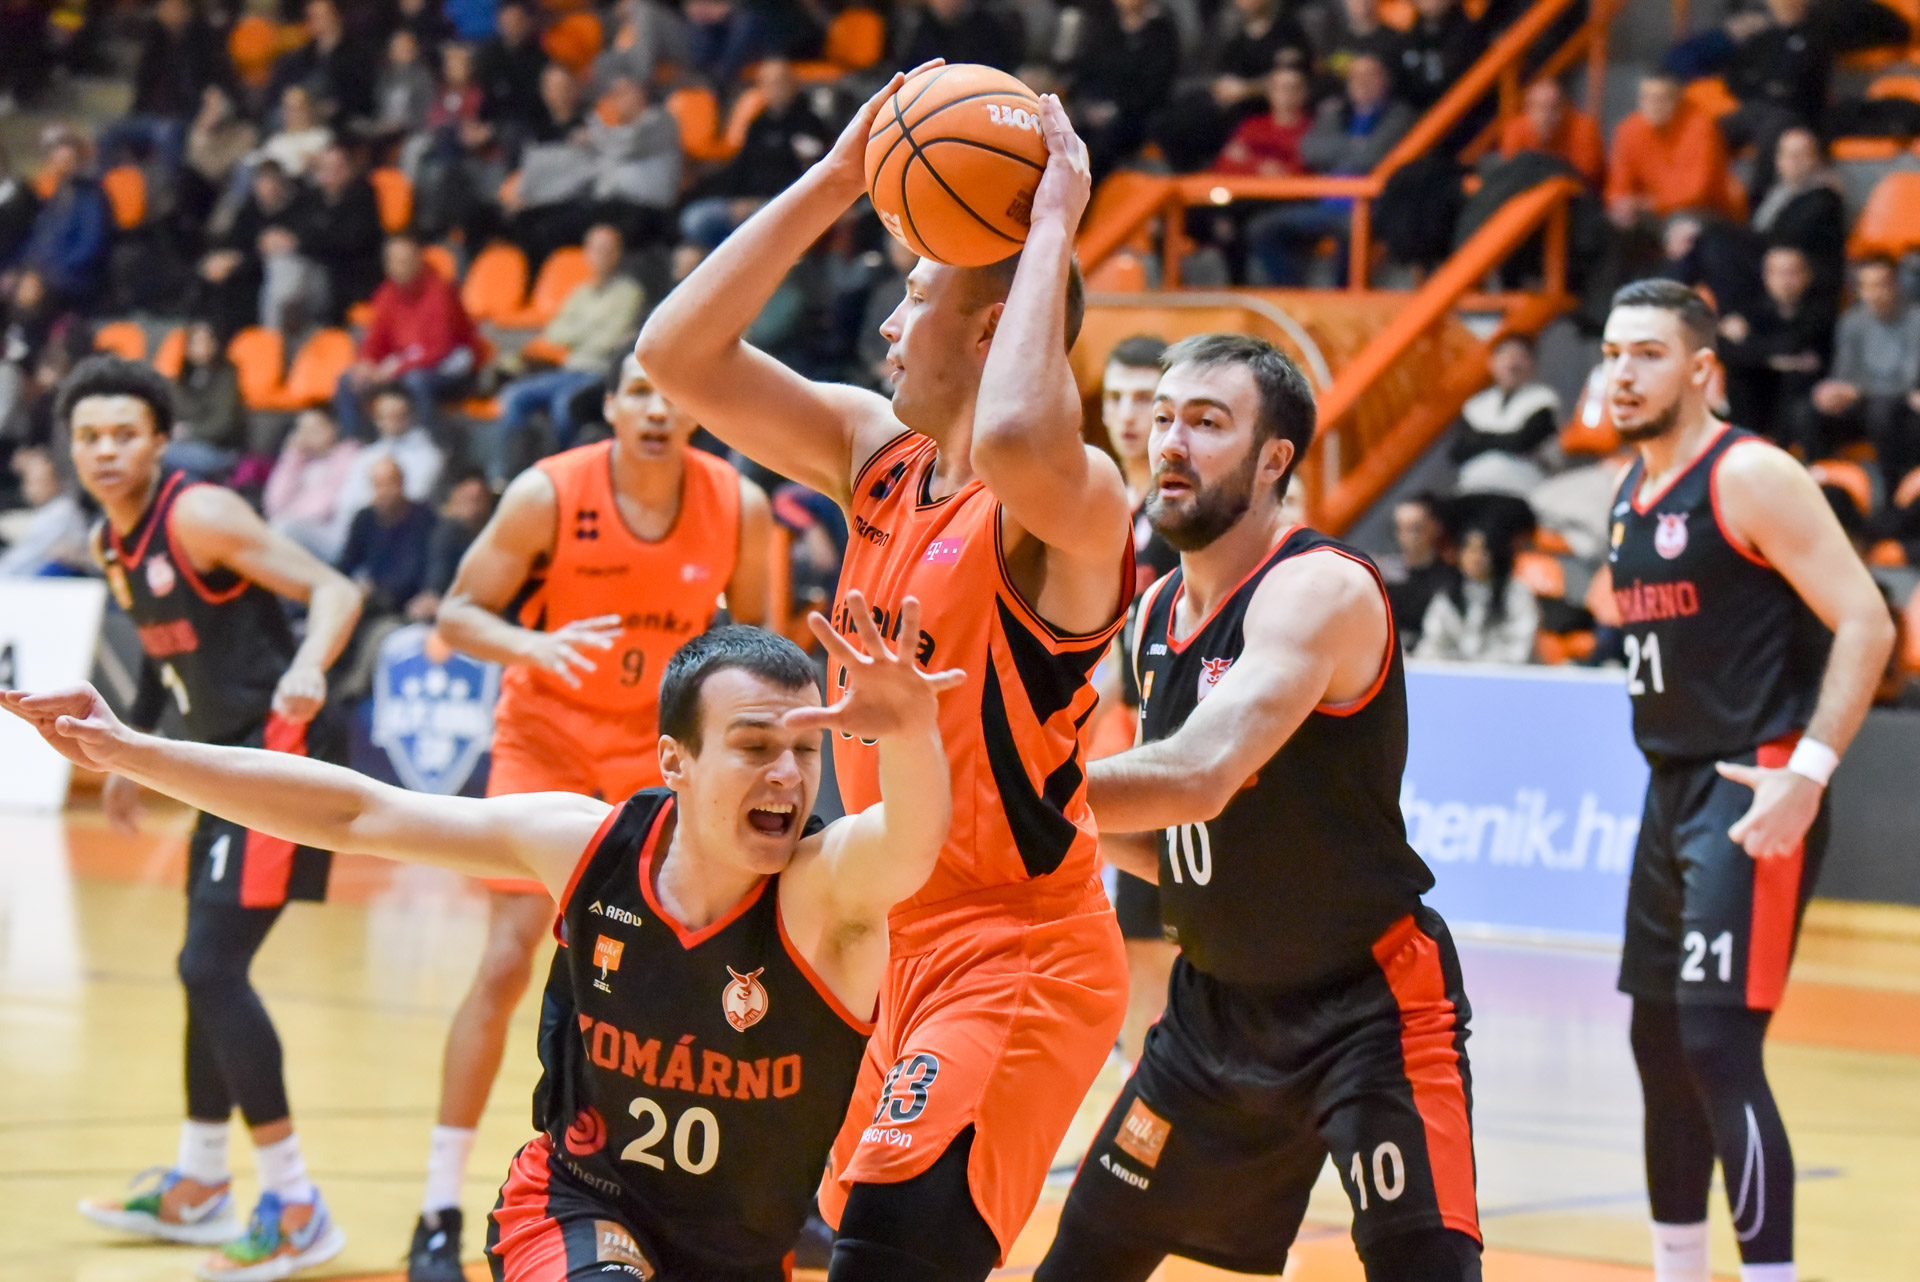 Good time for Šibenka continues also in play-offs